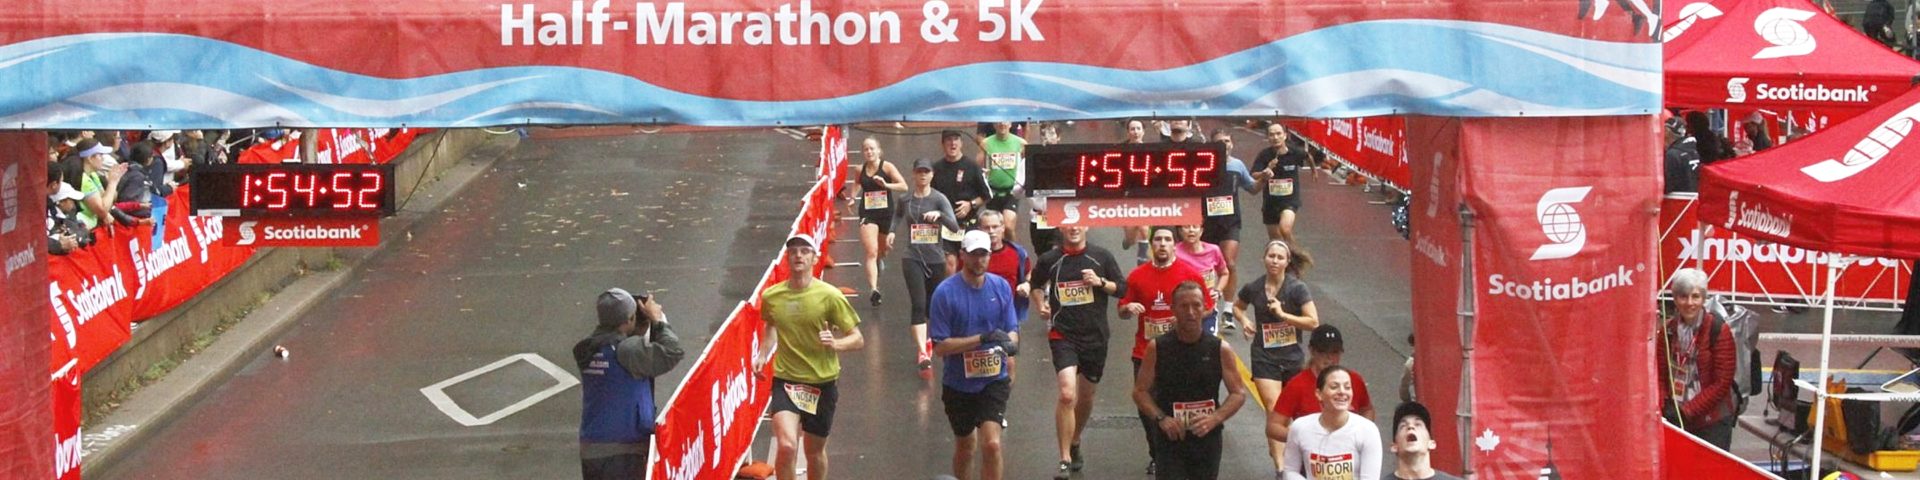 Finishing my first half marathon at the Scotiabank Waterfront marathon in 2012, the first part of my journey from couch to half-ironman